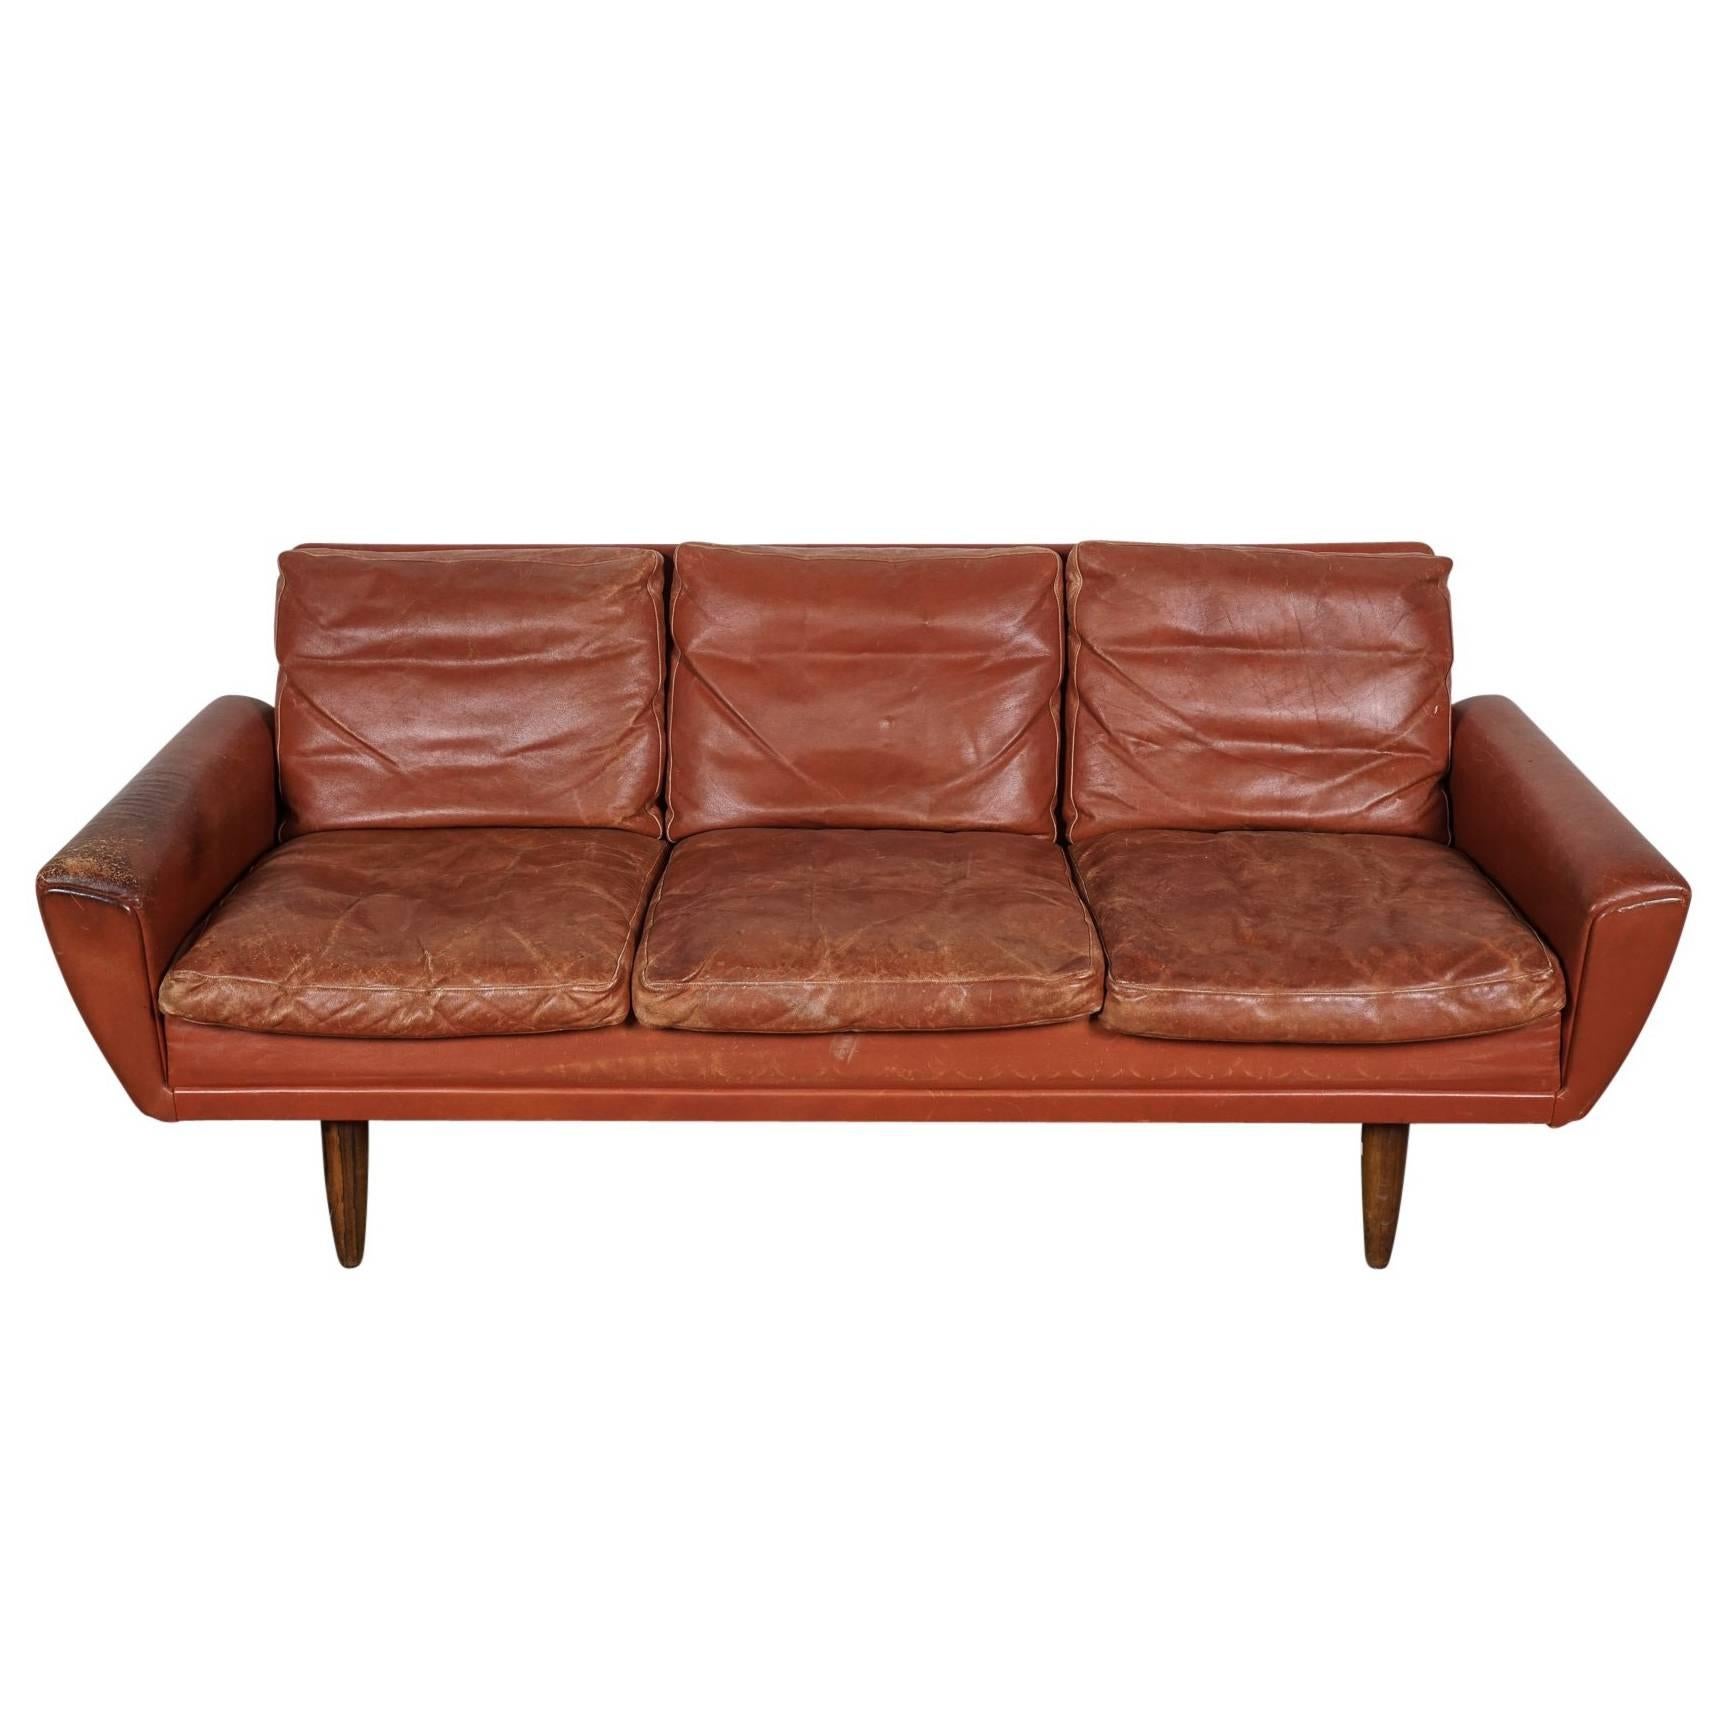 Danish Mid-Century Sofa in Red Leather Designed by Georg Thams